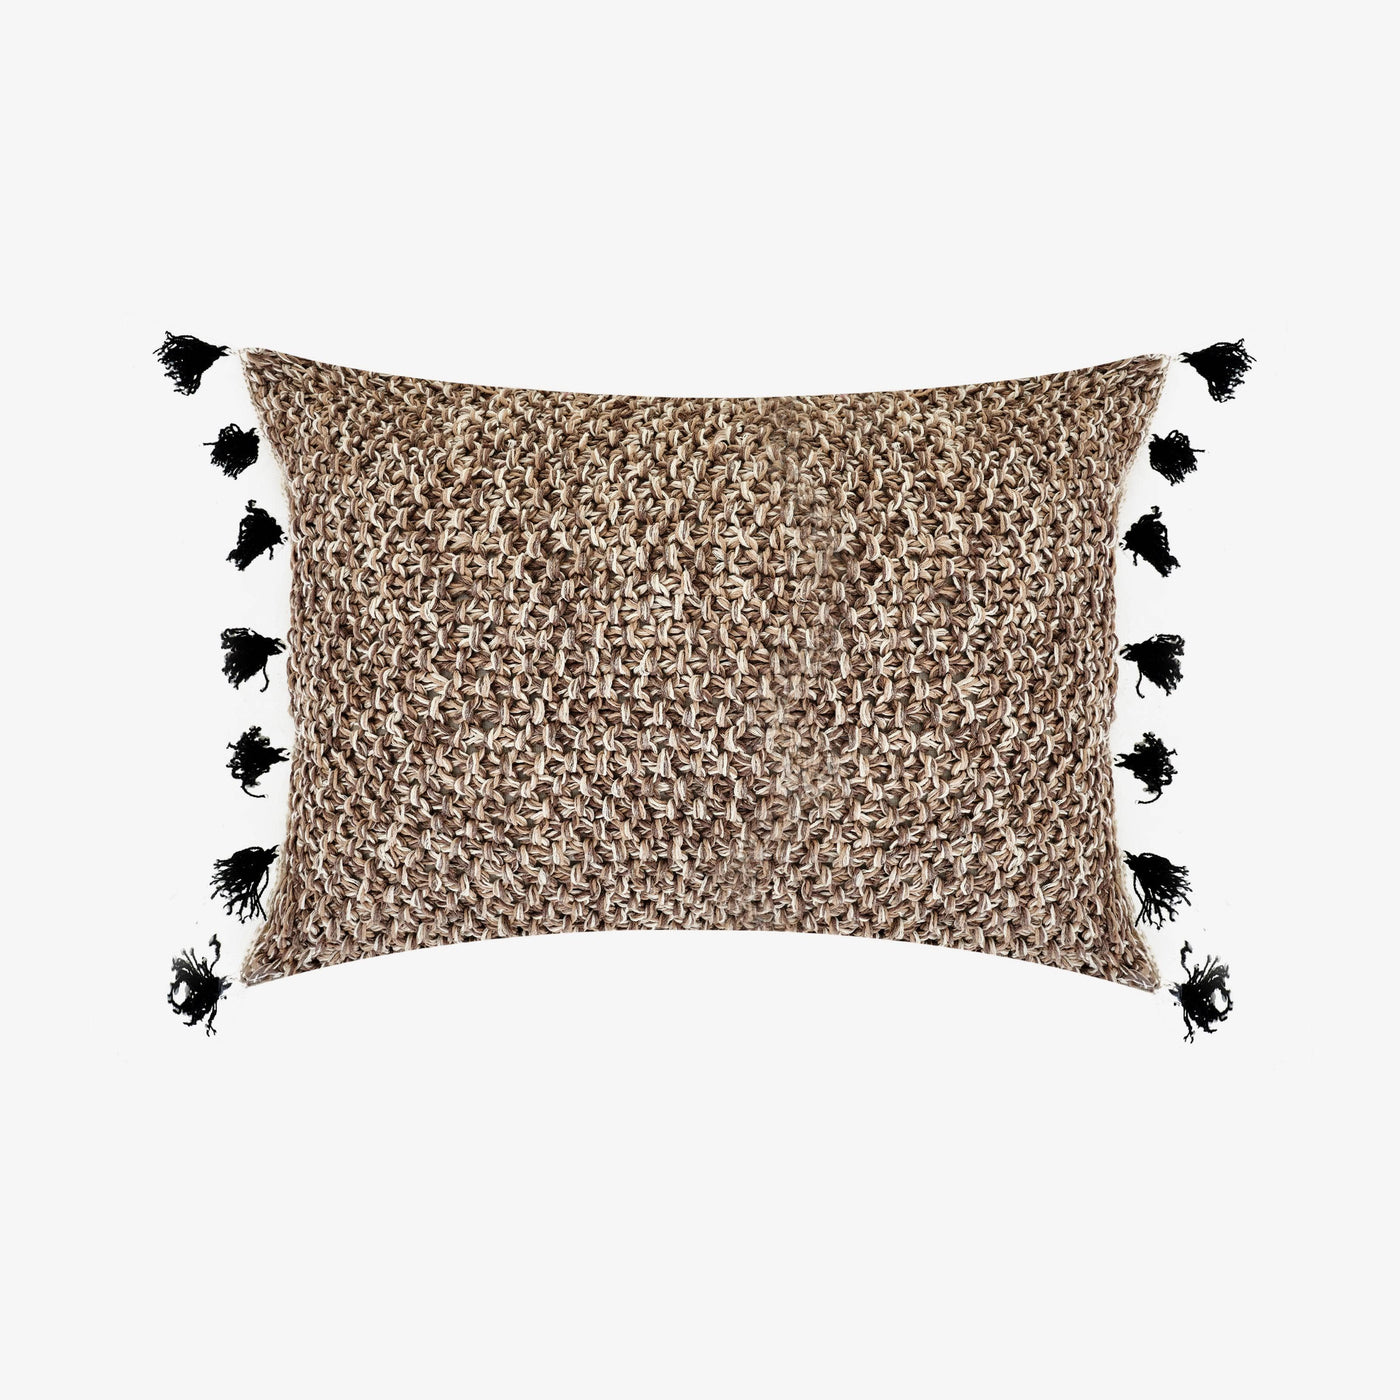 Hurley Cushion Cover, Natural, 45x60 cm 1